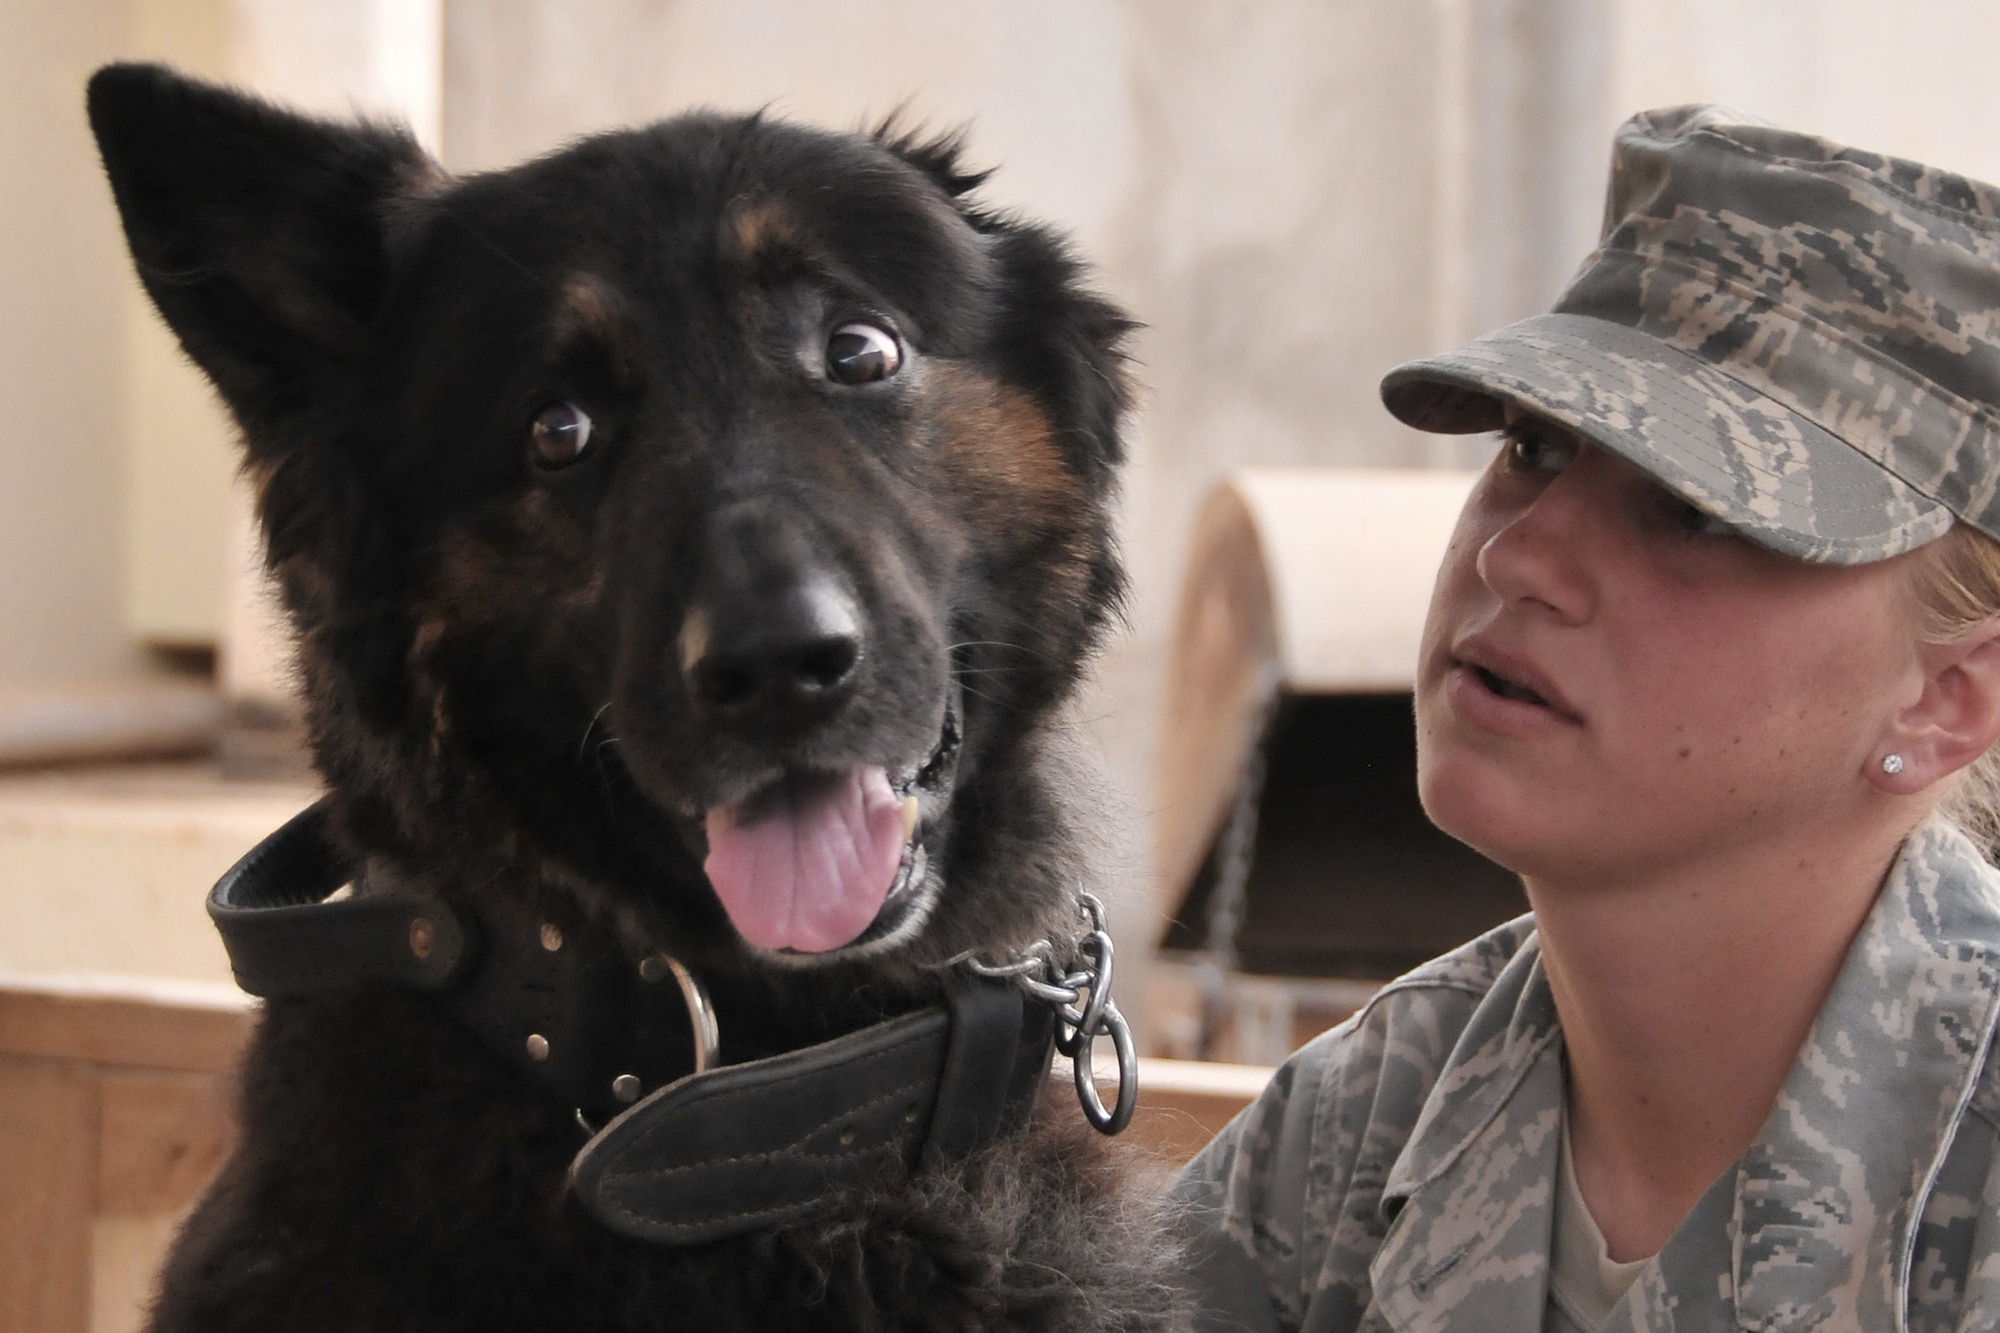 Staff Sgt. Kristen Smith gives verbal positive reinforcement to her explosives-detection military working dog, Cezar, for his conduct during his participation in the K-9 Visitation Program at the Air Force Theater Hospital May 15 at Joint Base Balad, Iraq. The newly created program allows AFTH patients to interact with K-9s to help further their recovery after injury or illness as a form of animal-assisted therapy. The program also furthers the military working dogs' training, as they work in close proximity with coalition forces here during their day-to-day mission. Sergeant Smith is a 332nd Expeditionary Security Forces Group K-9 handler. She and her dog are deployed from McGuire Air Force Base, N.J. Sergeant Smith is a native of Johnstown, Pa. (U.S. Air Force photo/Staff Sgt. Dilia Ayala) 
